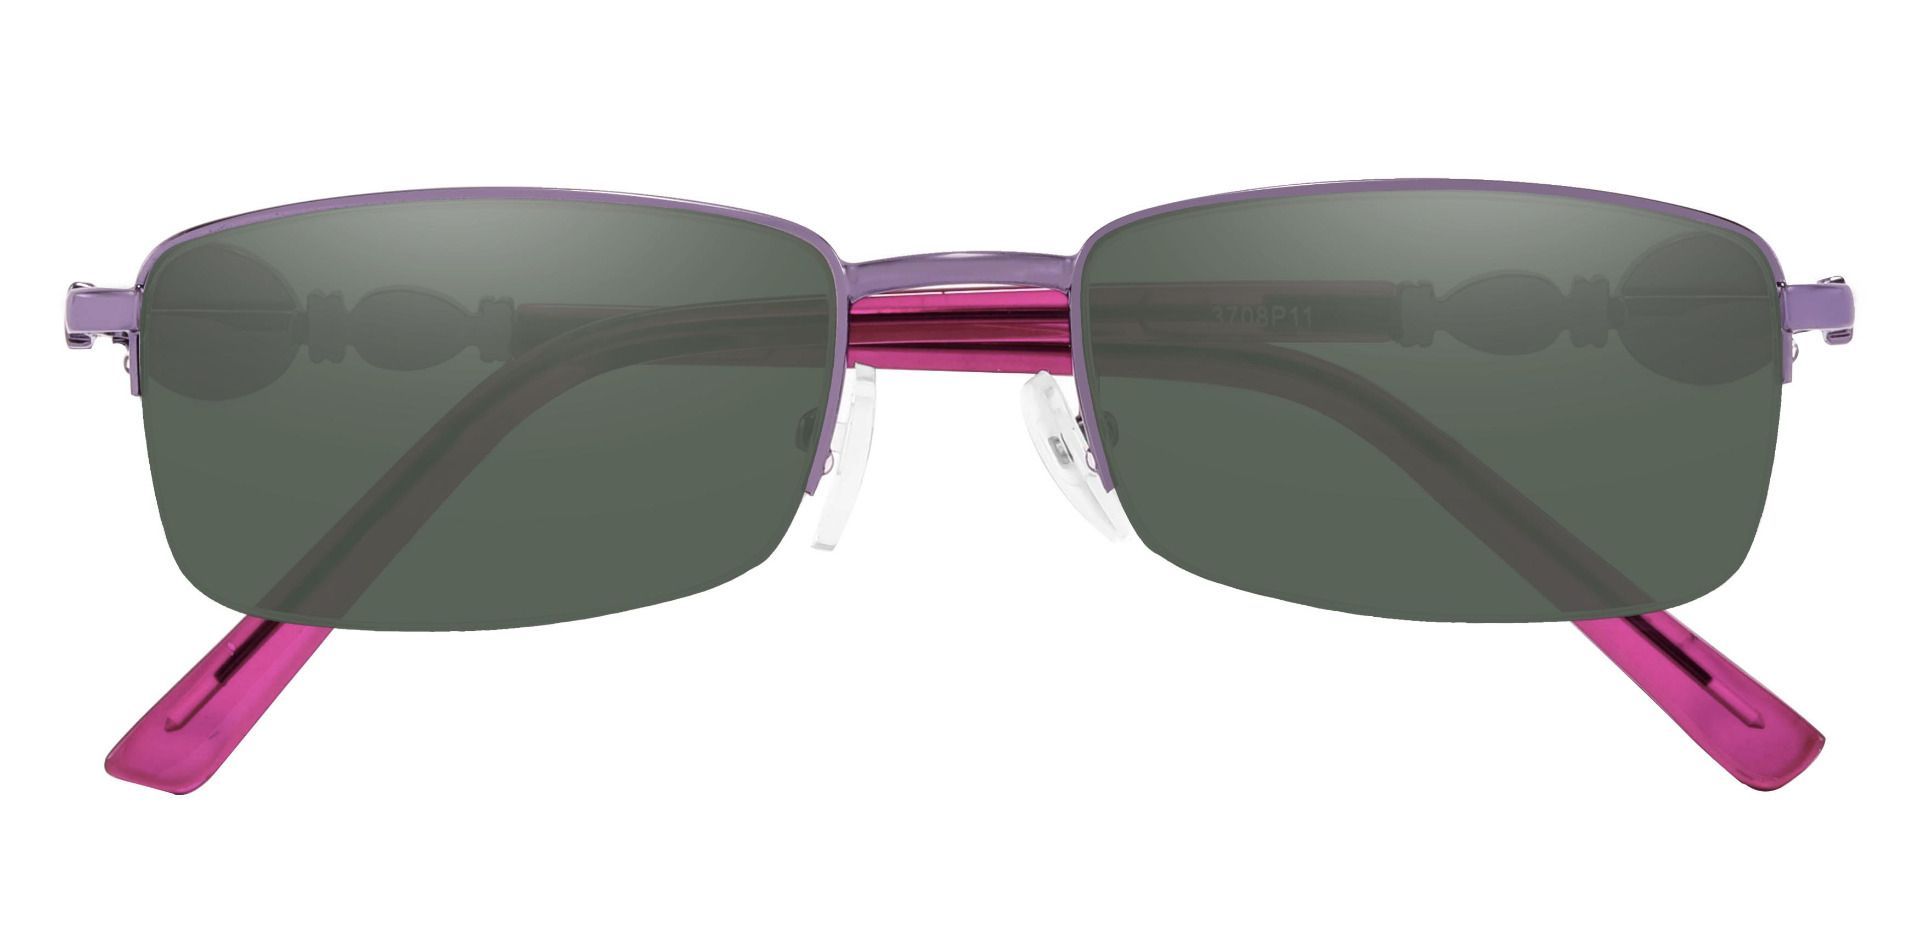 Crowley Rectangle Lined Bifocal Sunglasses - Purple Frame With Green Lenses